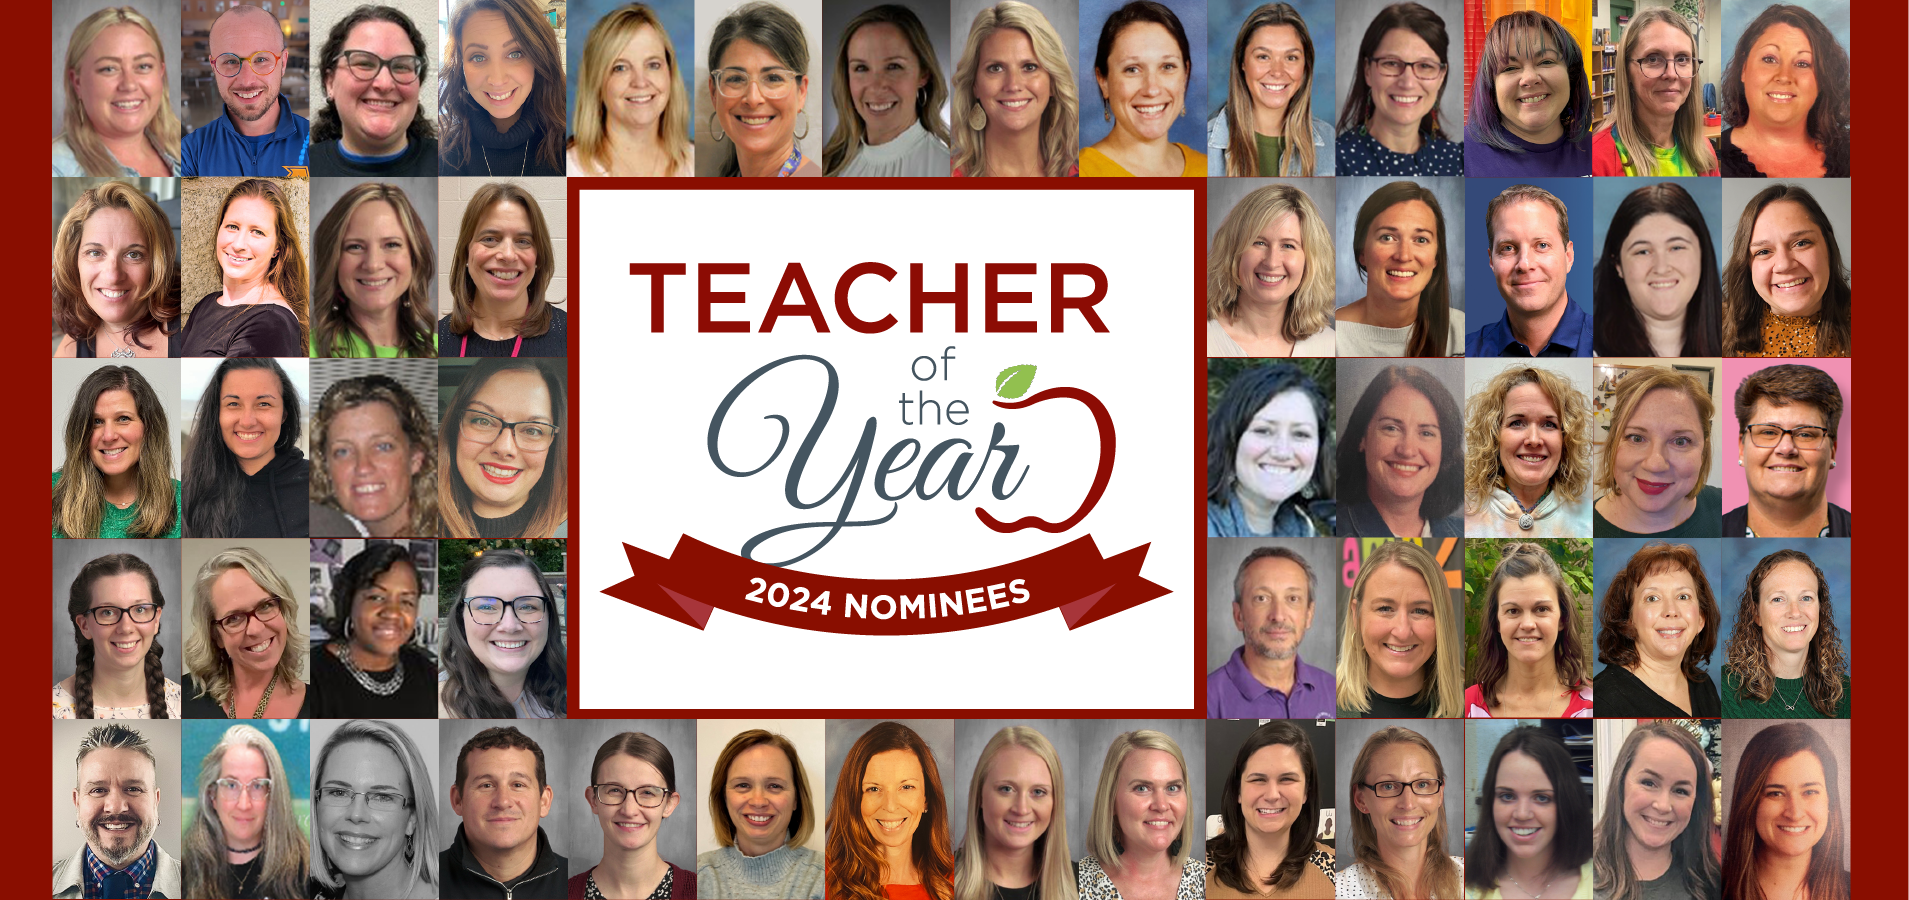 Congratulations to our 2024 Teacher of the Year nominees.